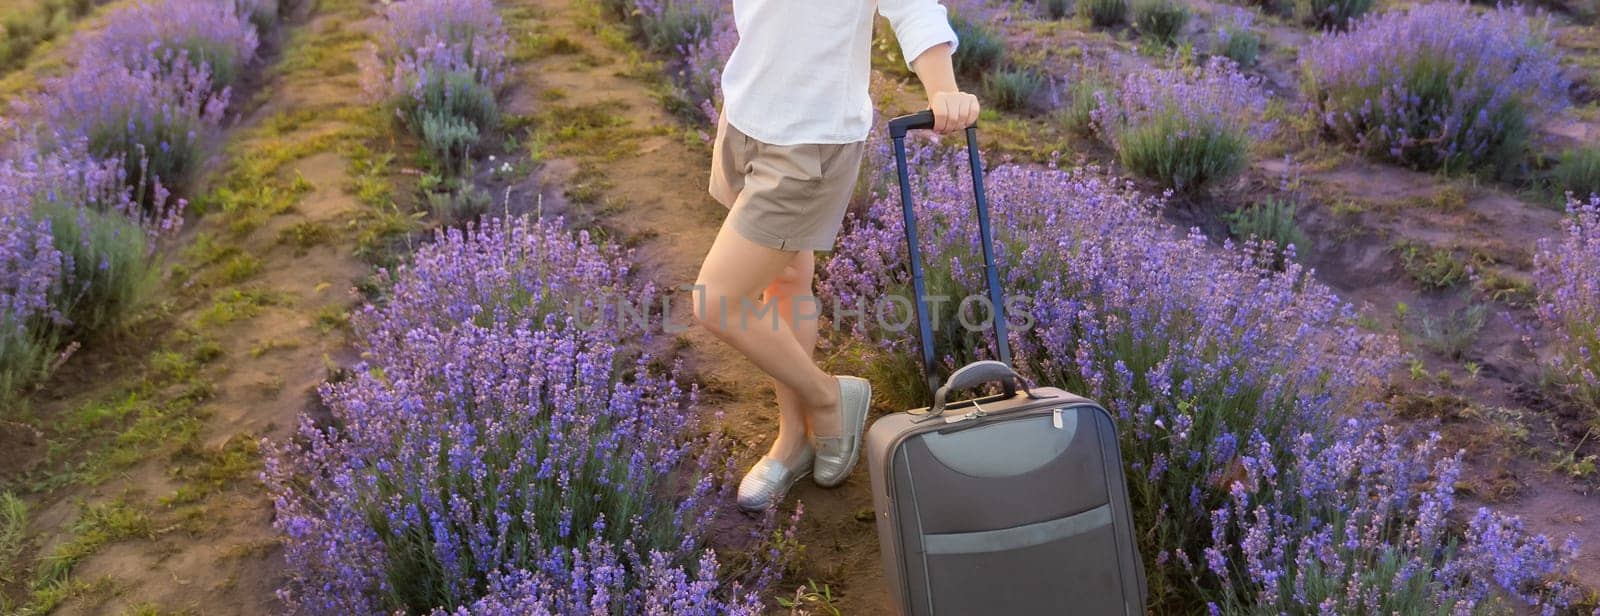 woman with luggage in lavender field by Andelov13